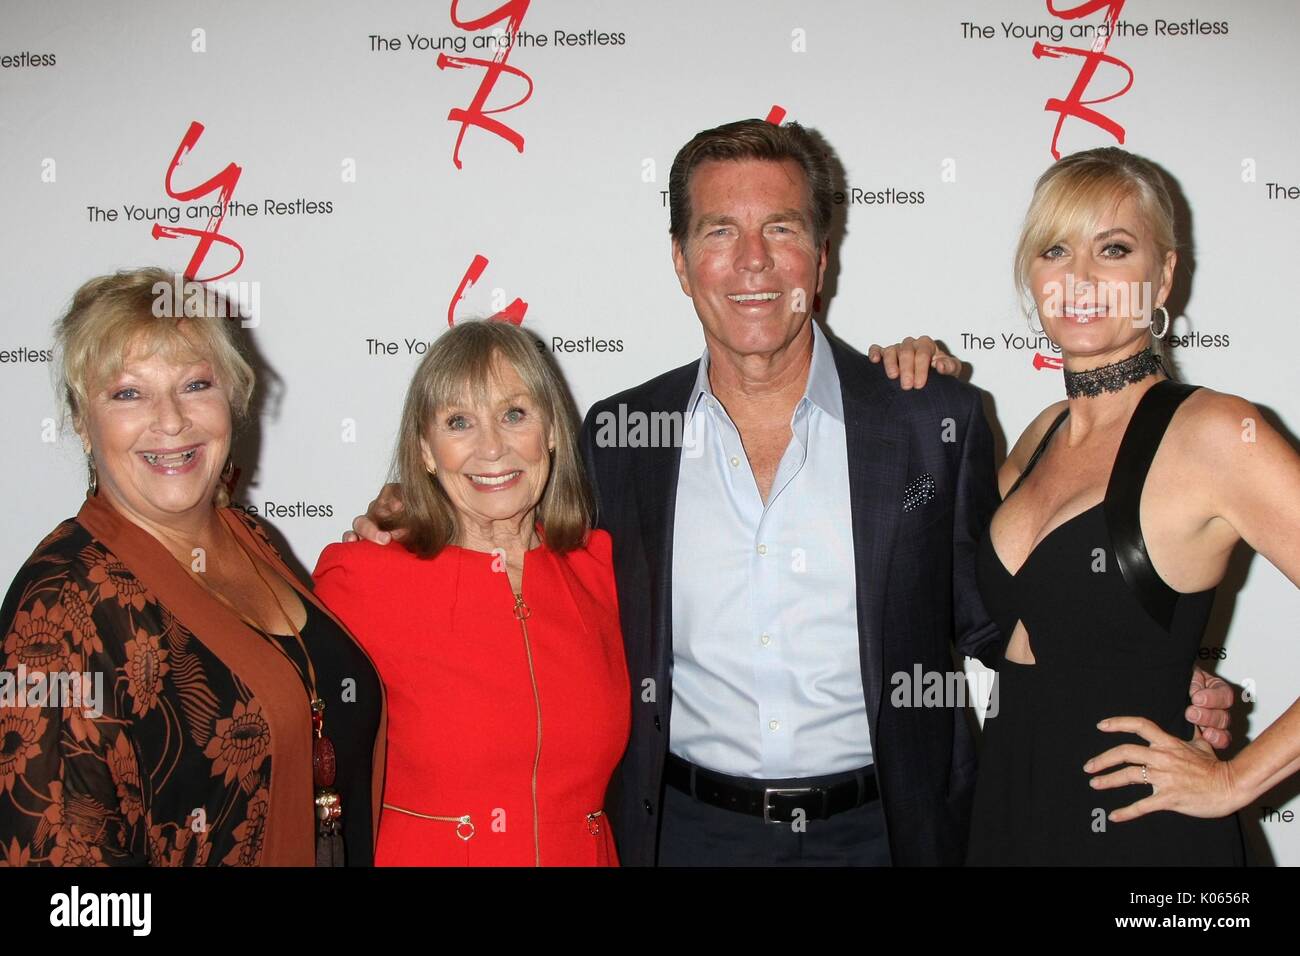 Burbank, CA. 19th Aug, 2017. Beth Maitland, Marla Adams, Peter Bergman, Eileen Davidson in attendance for YOUNG AND RESTLESS Fan Club Dinner - Part 2, Burbank Convention Center, Burbank, CA August 19, 2017. Credit: Priscilla Grant/Everett Collection/Alamy Live News Stock Photo